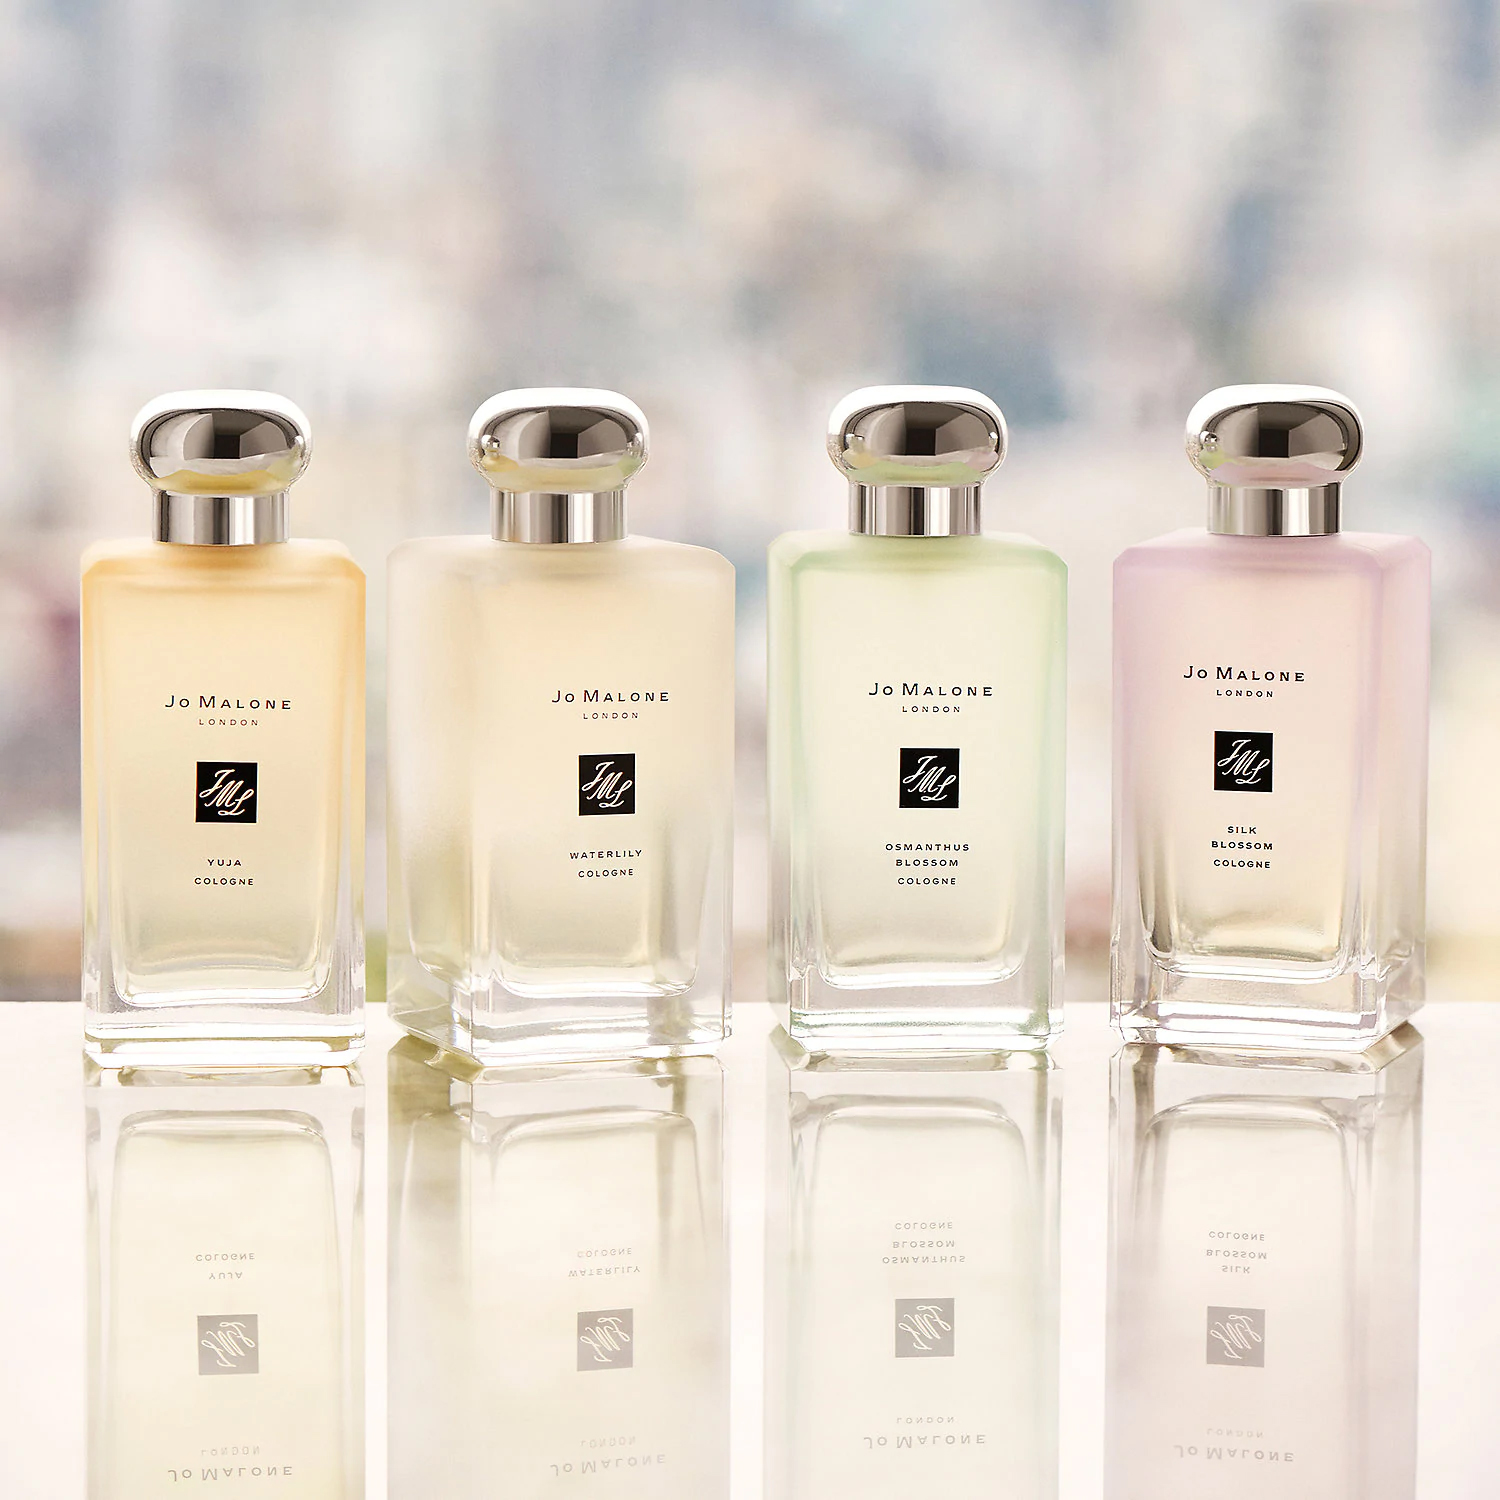 o.91788 - Jo Malone London Limited BLOSSOMS Series of Cologne 2020